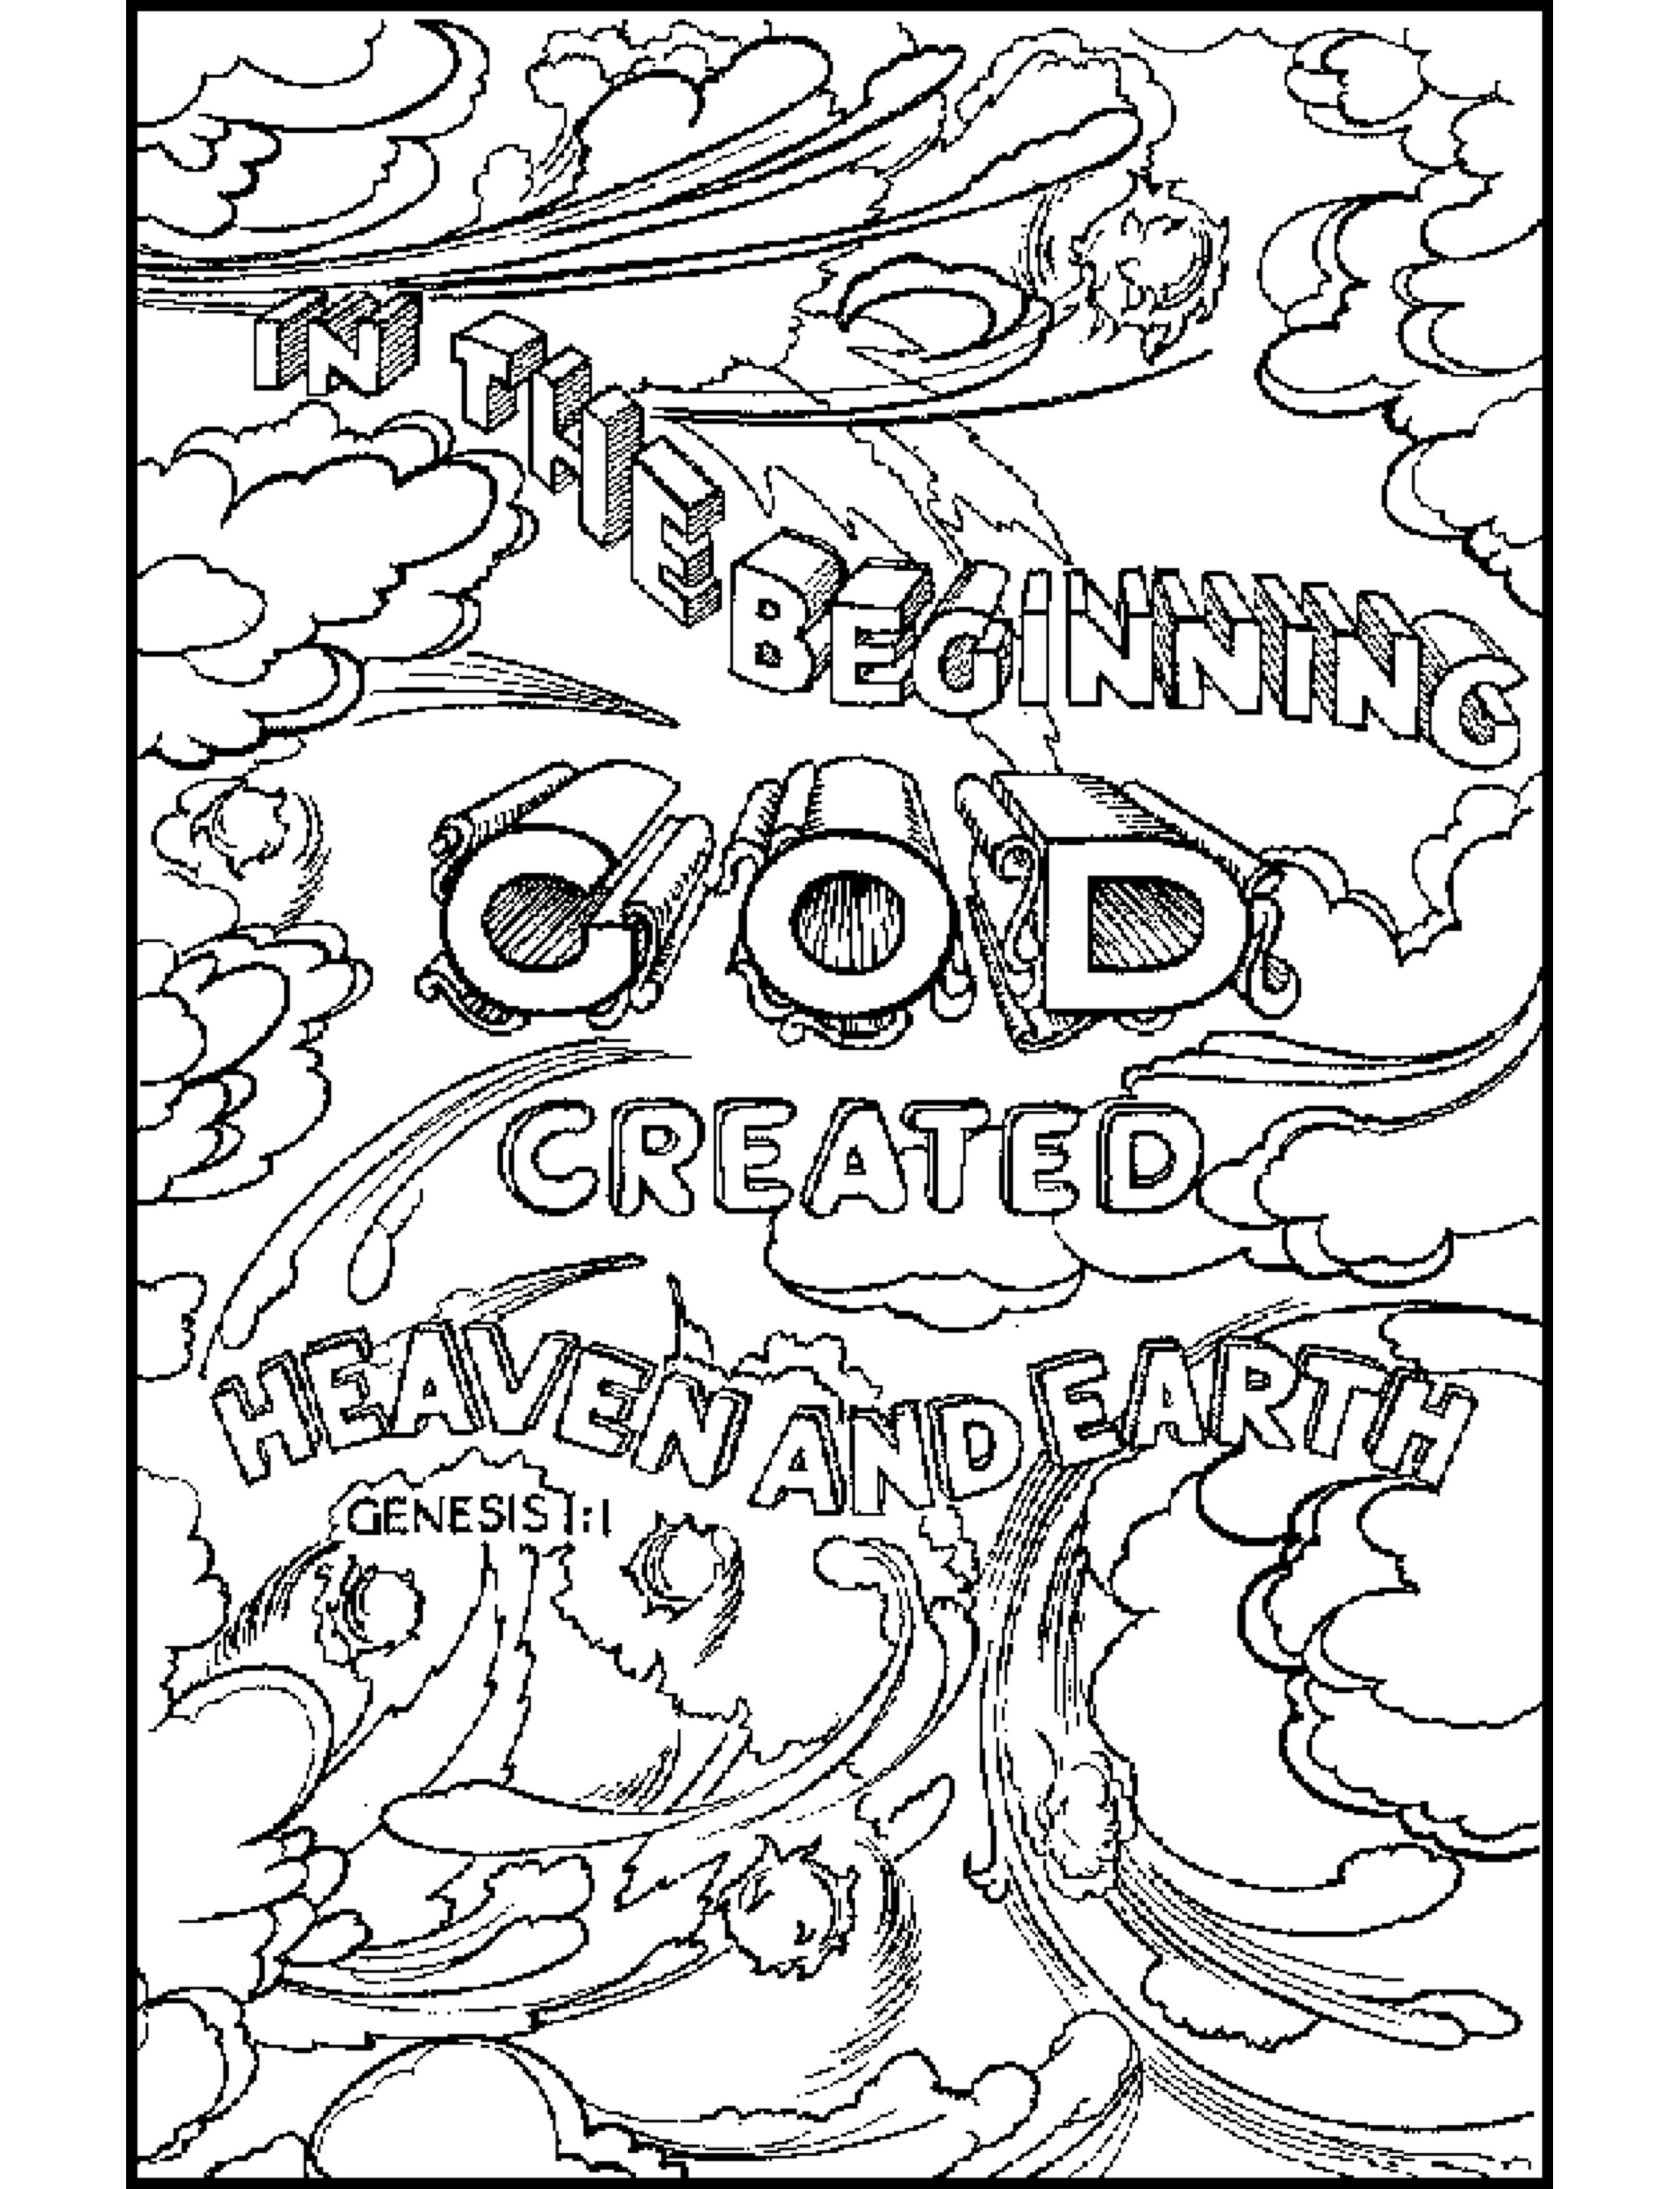 5 Best Images of Printable Adult Coloring Pages Christian ...